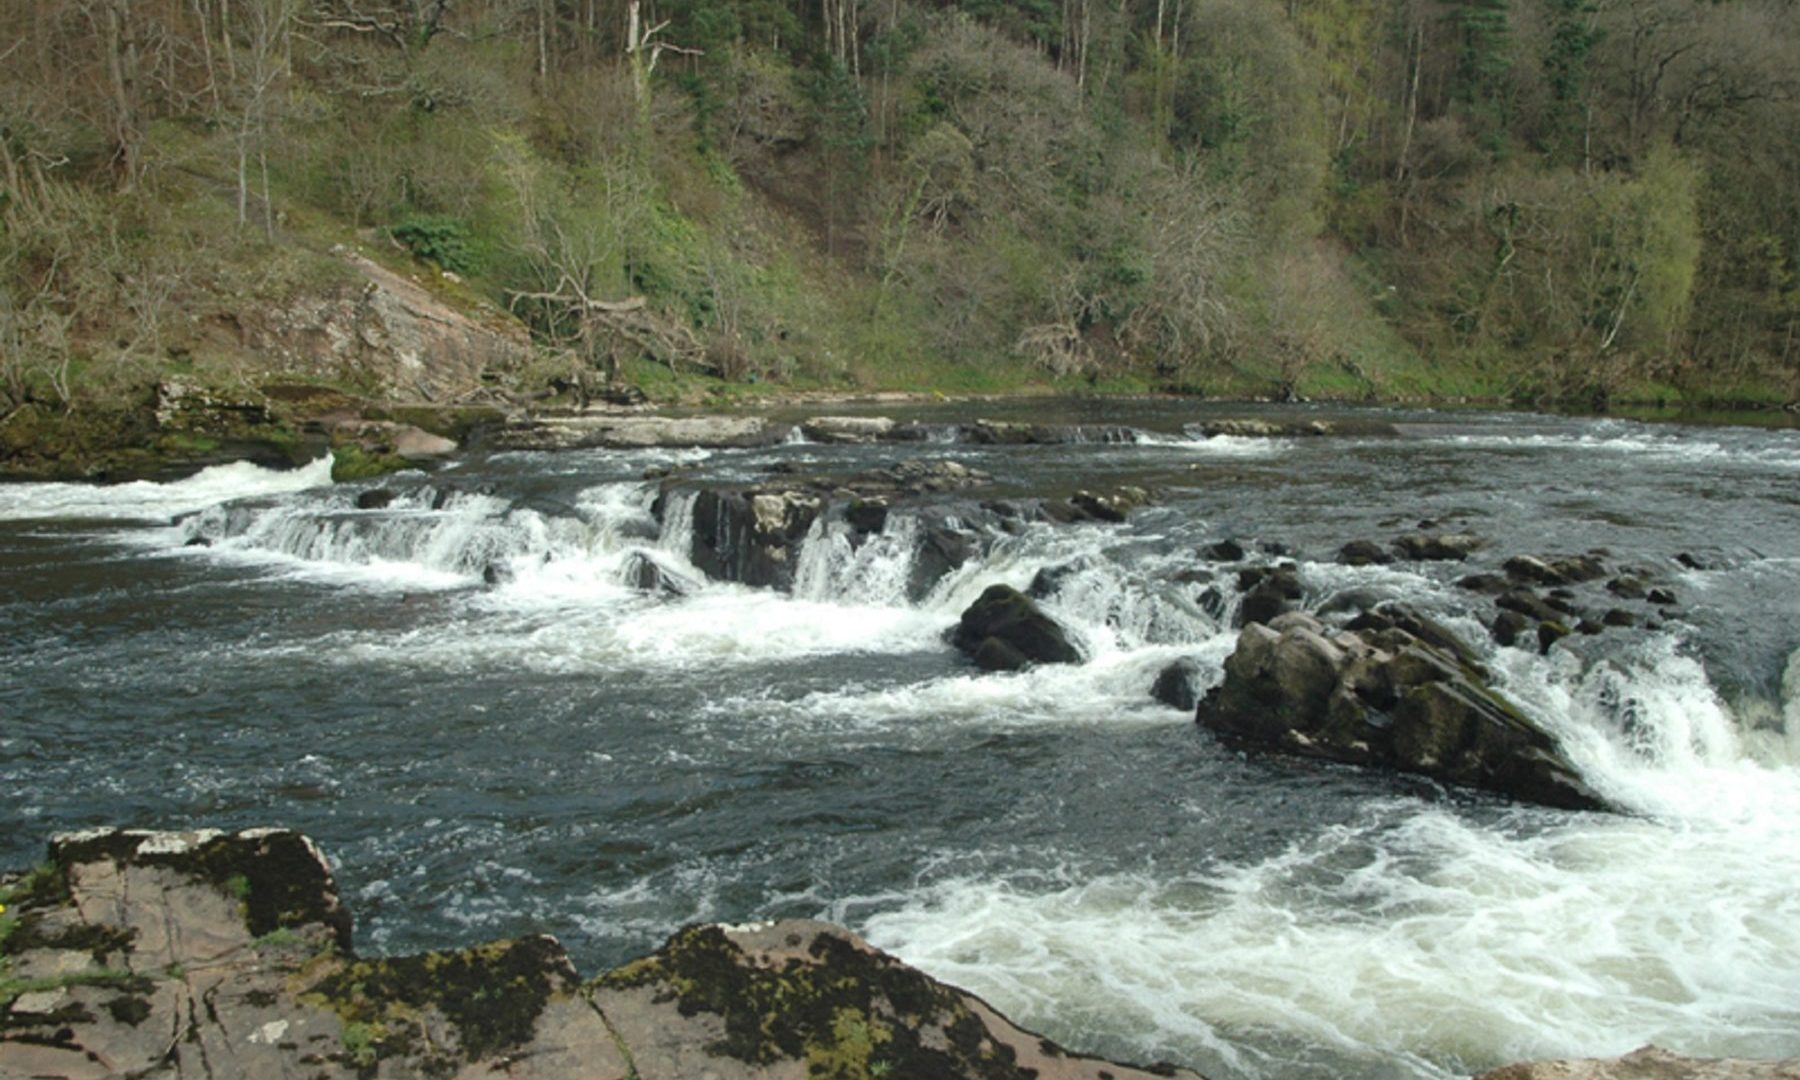 medium-walks-the-weir-by-eden-lacy-along-the-rowley-estate-cumbria-fly-fishing